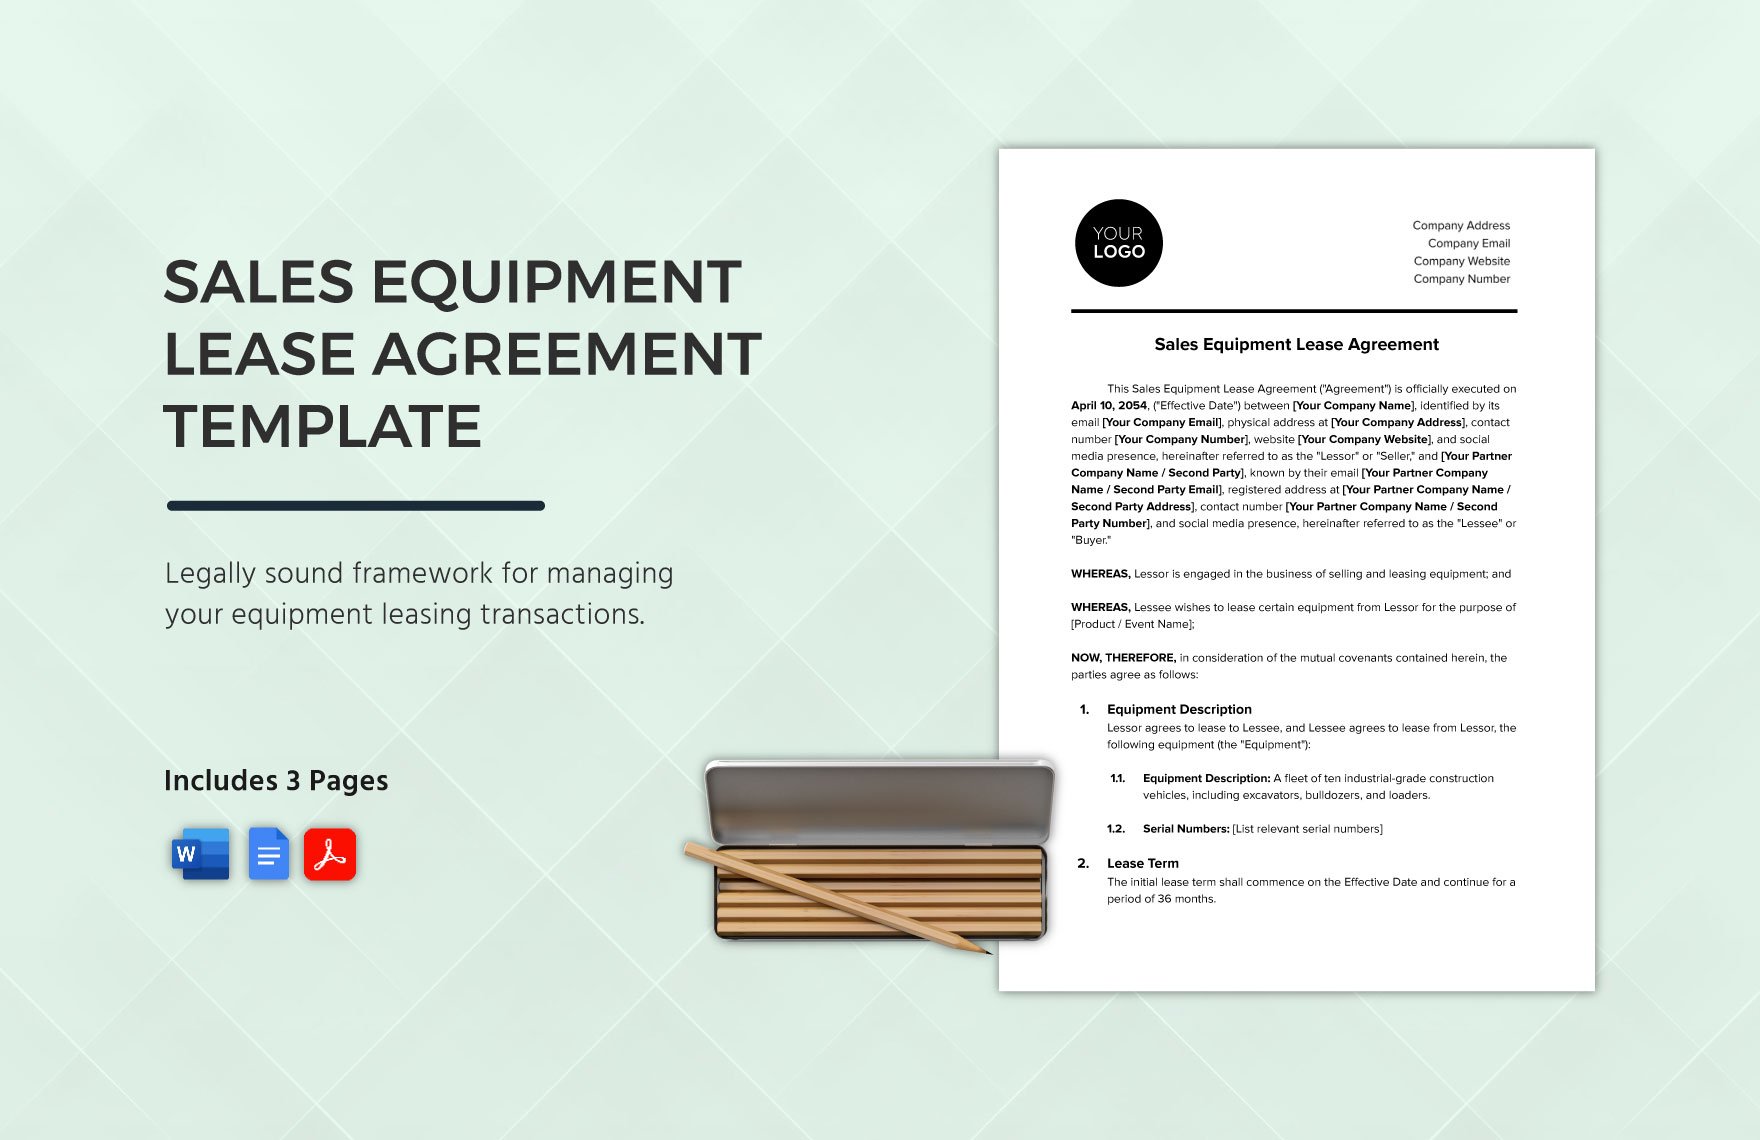 Sales Equipment Lease Agreement Template